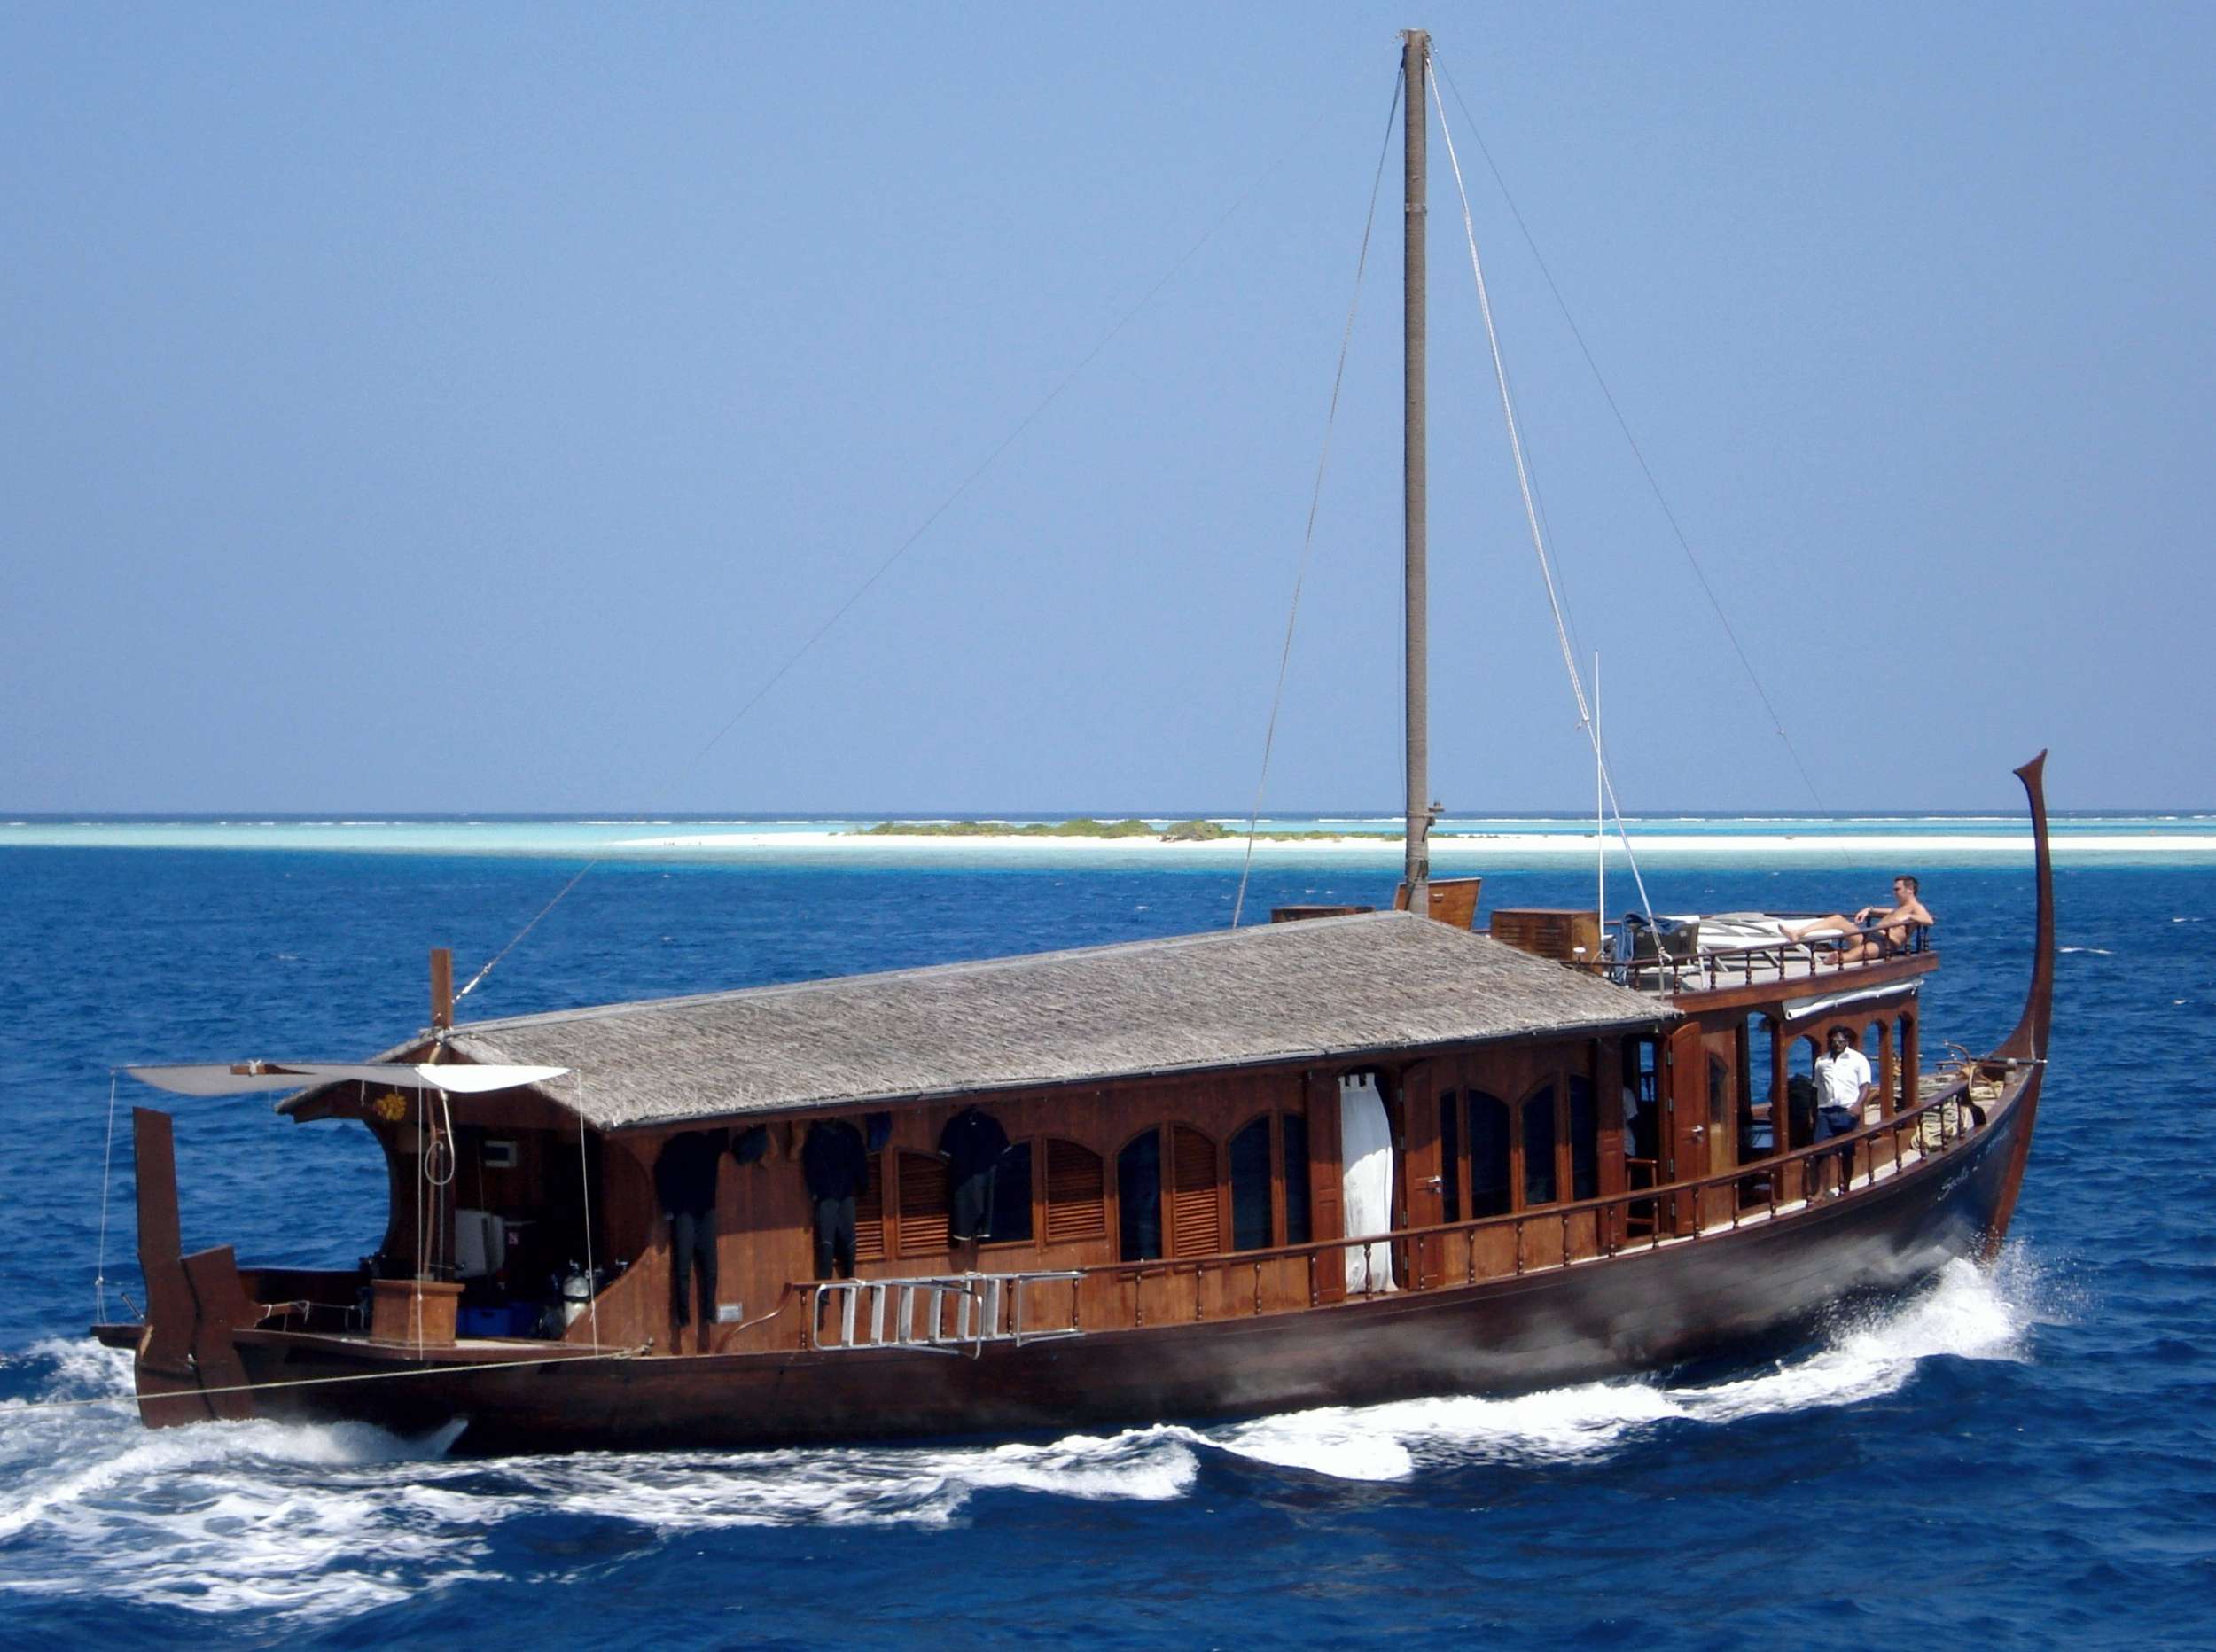 DHONI STELLA 2 - Luxury yacht charter Thailand & Boat hire in Indian Ocean & SE Asia 1